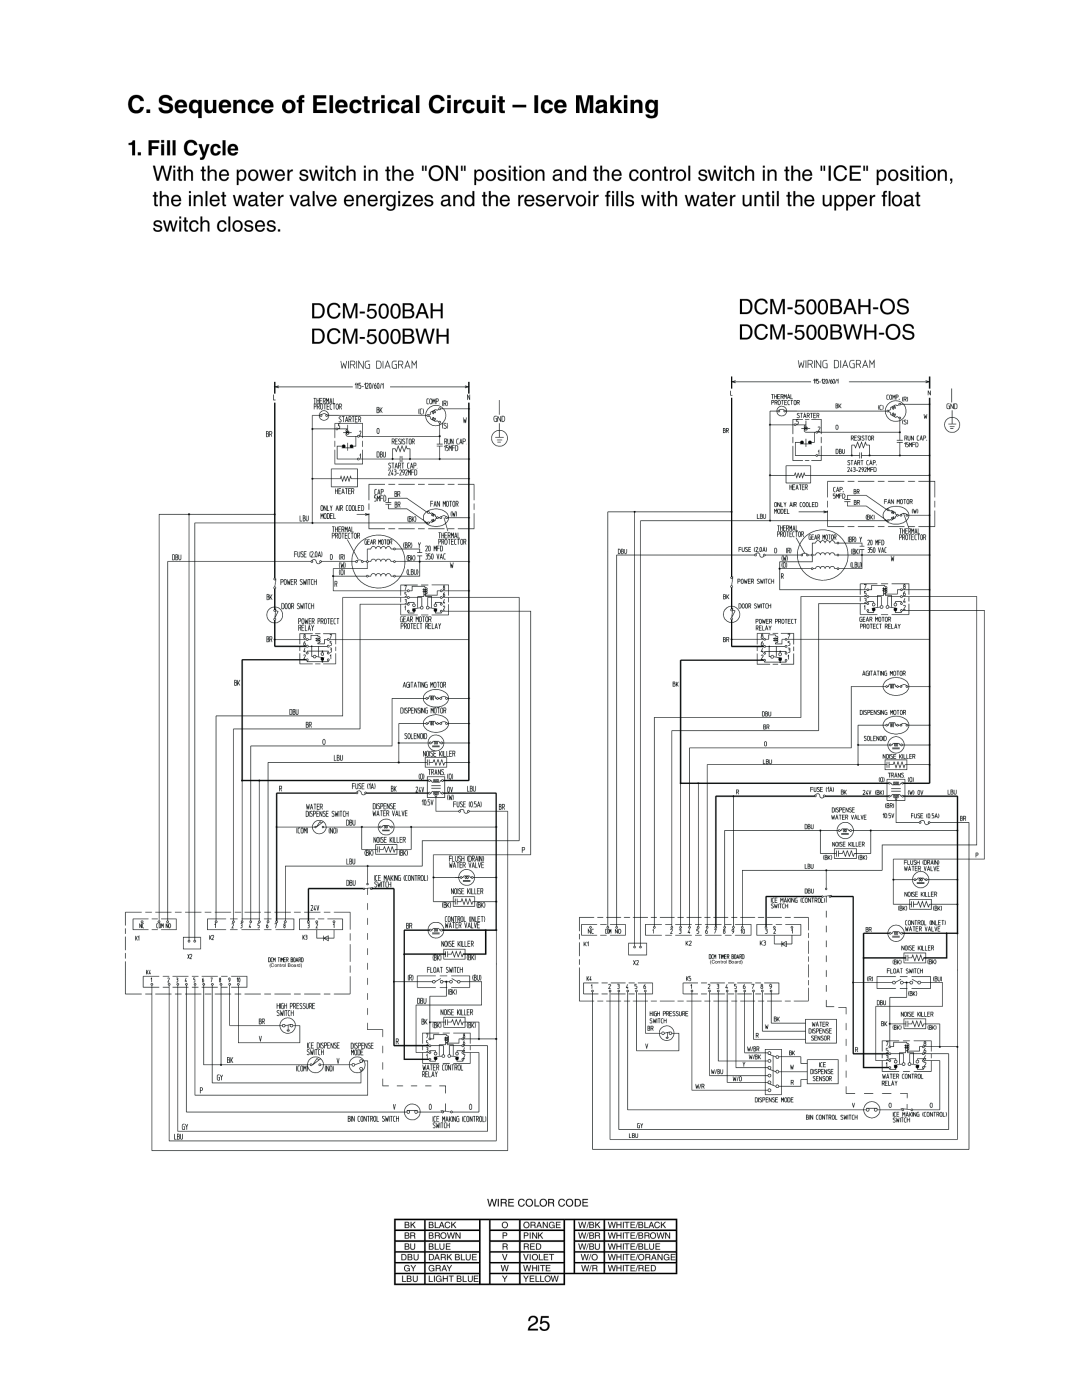 Hoshizaki DCM-500BWH-OS, DCM-500BAH-OS service manual C. Sequence of Electrical Circuit - Ice Making, Fill Cycle 